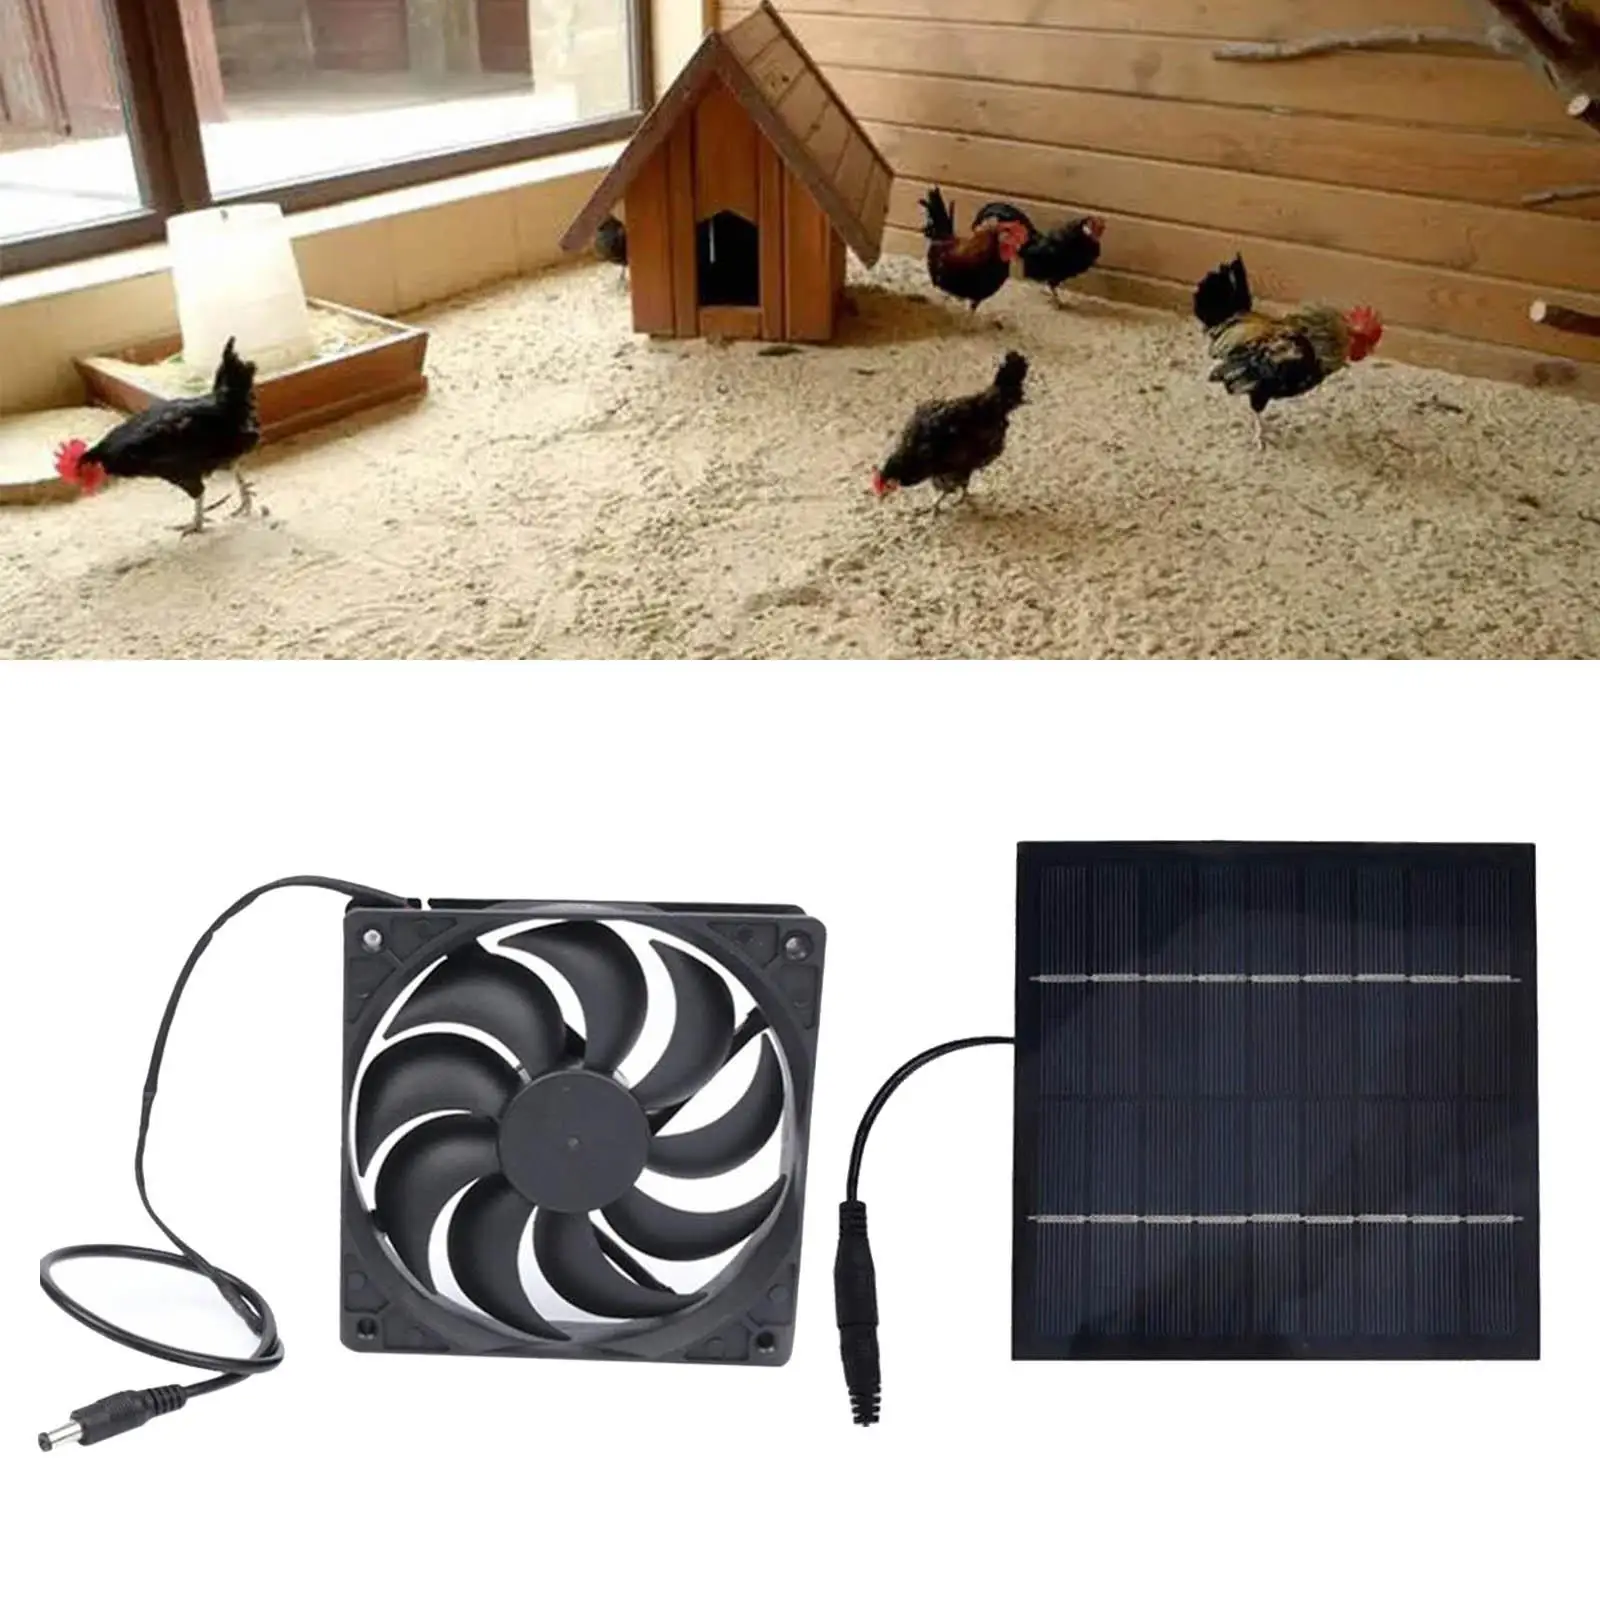 Solar Powered Panel Fan, Lightweight Ventilation Fans for Greenhouse Sheds Travelling